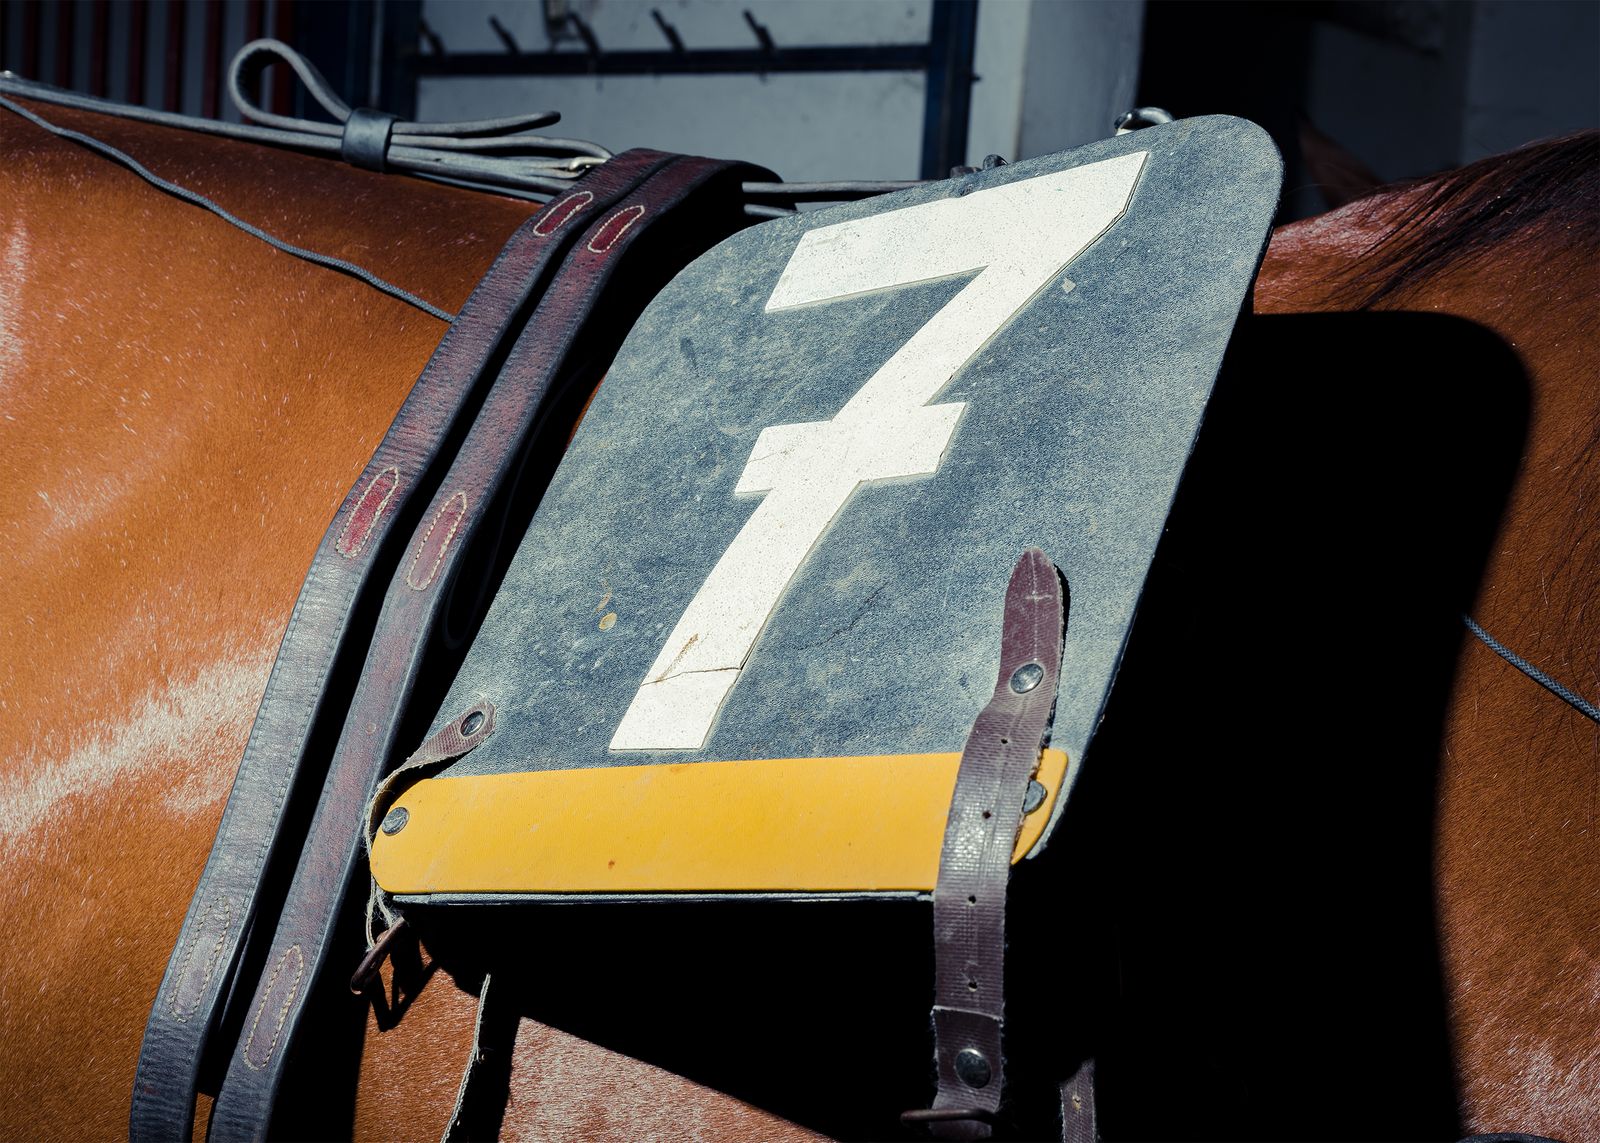 © Alessio Pellicoro - The horse's number on its back. It stands for his stable and to recognize it.